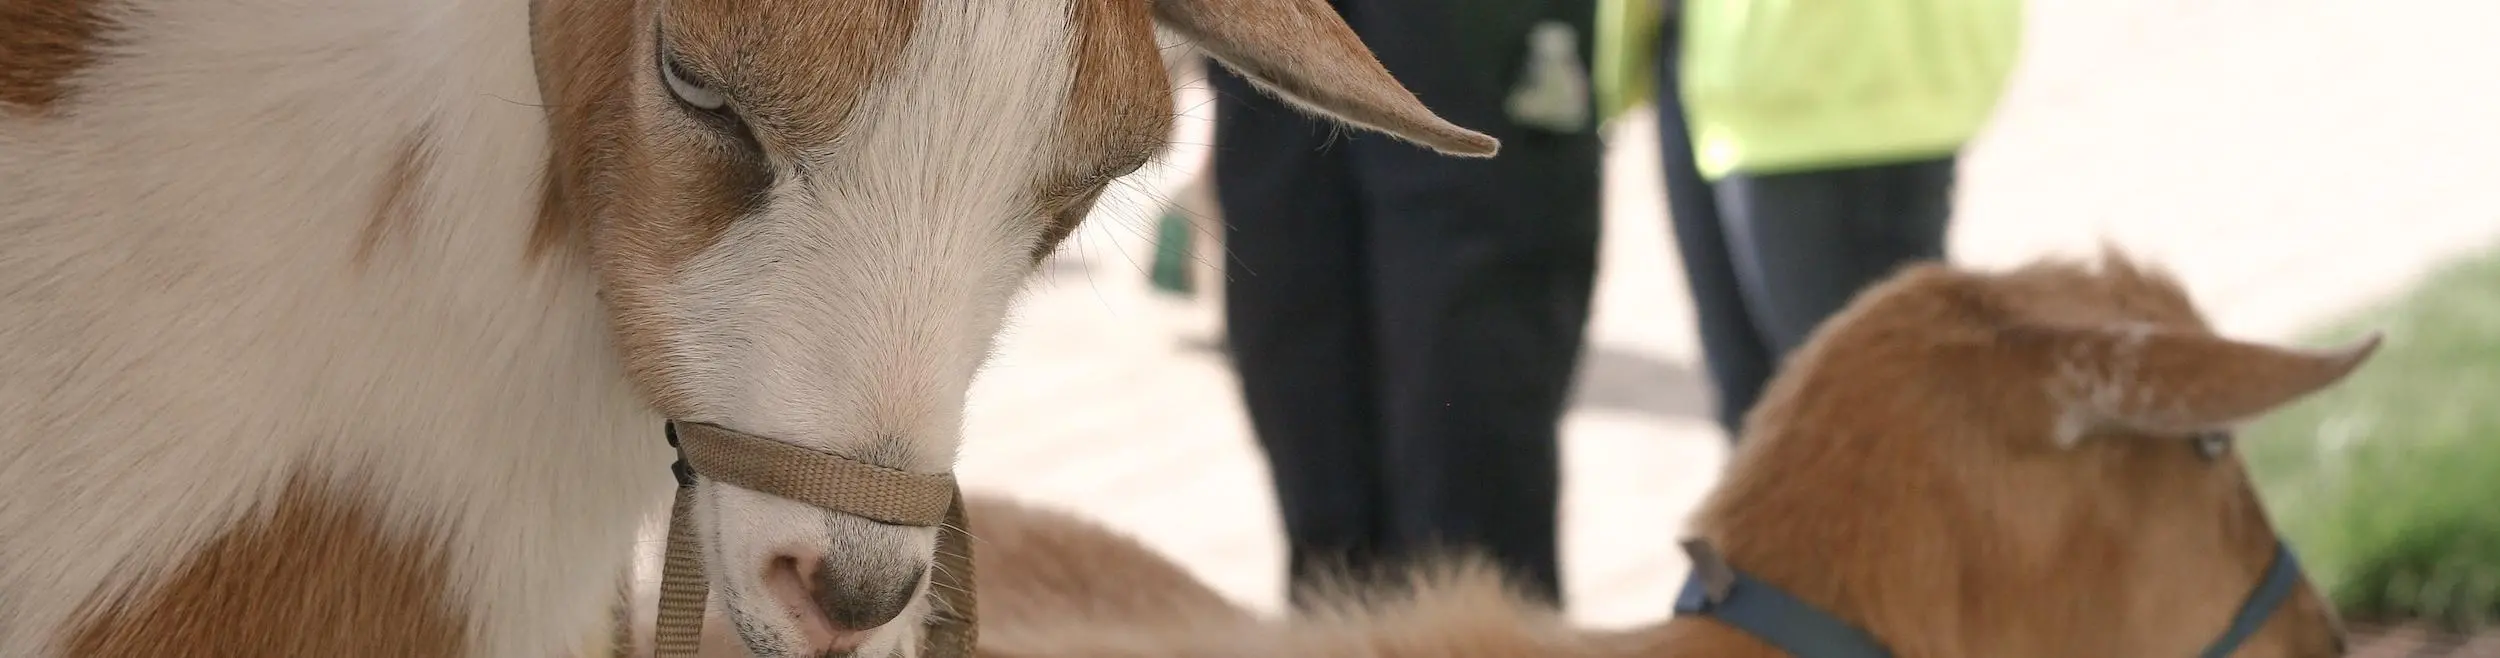 Up close portrait of a goat with a goat in background